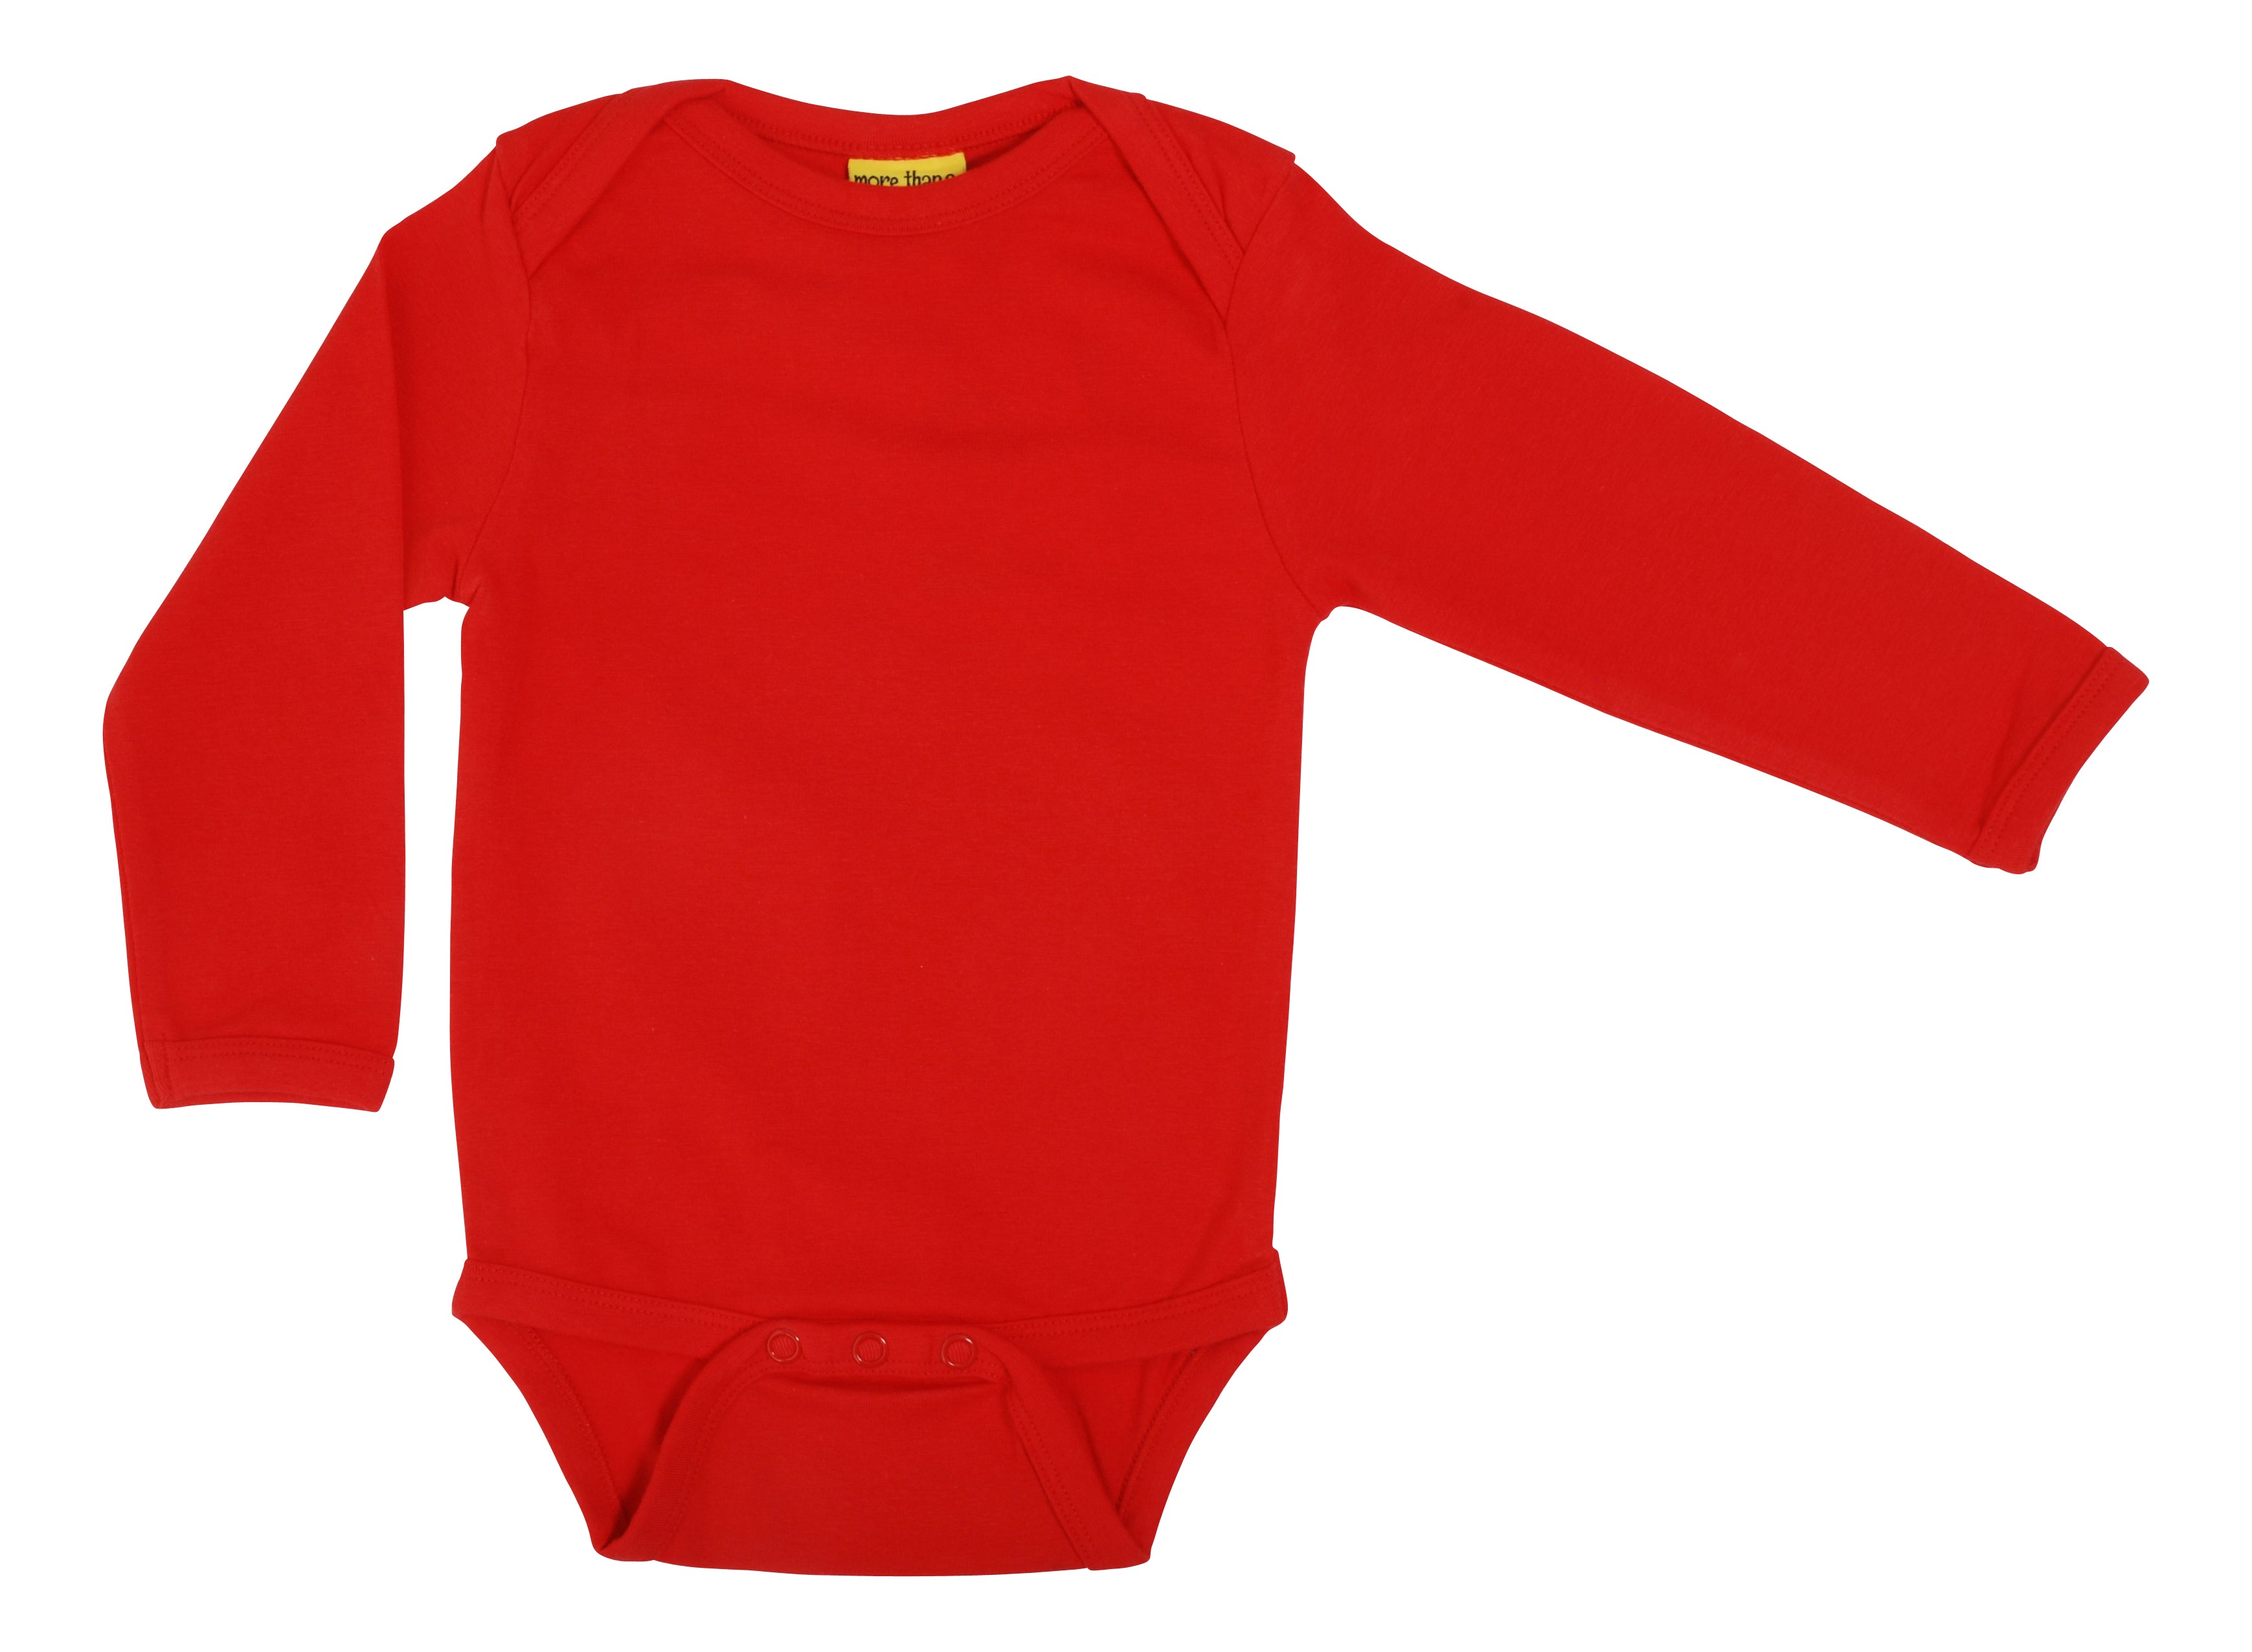 Romper Long Sleeve Body Poppy Red - More Than a Fling (Duns Sweden)